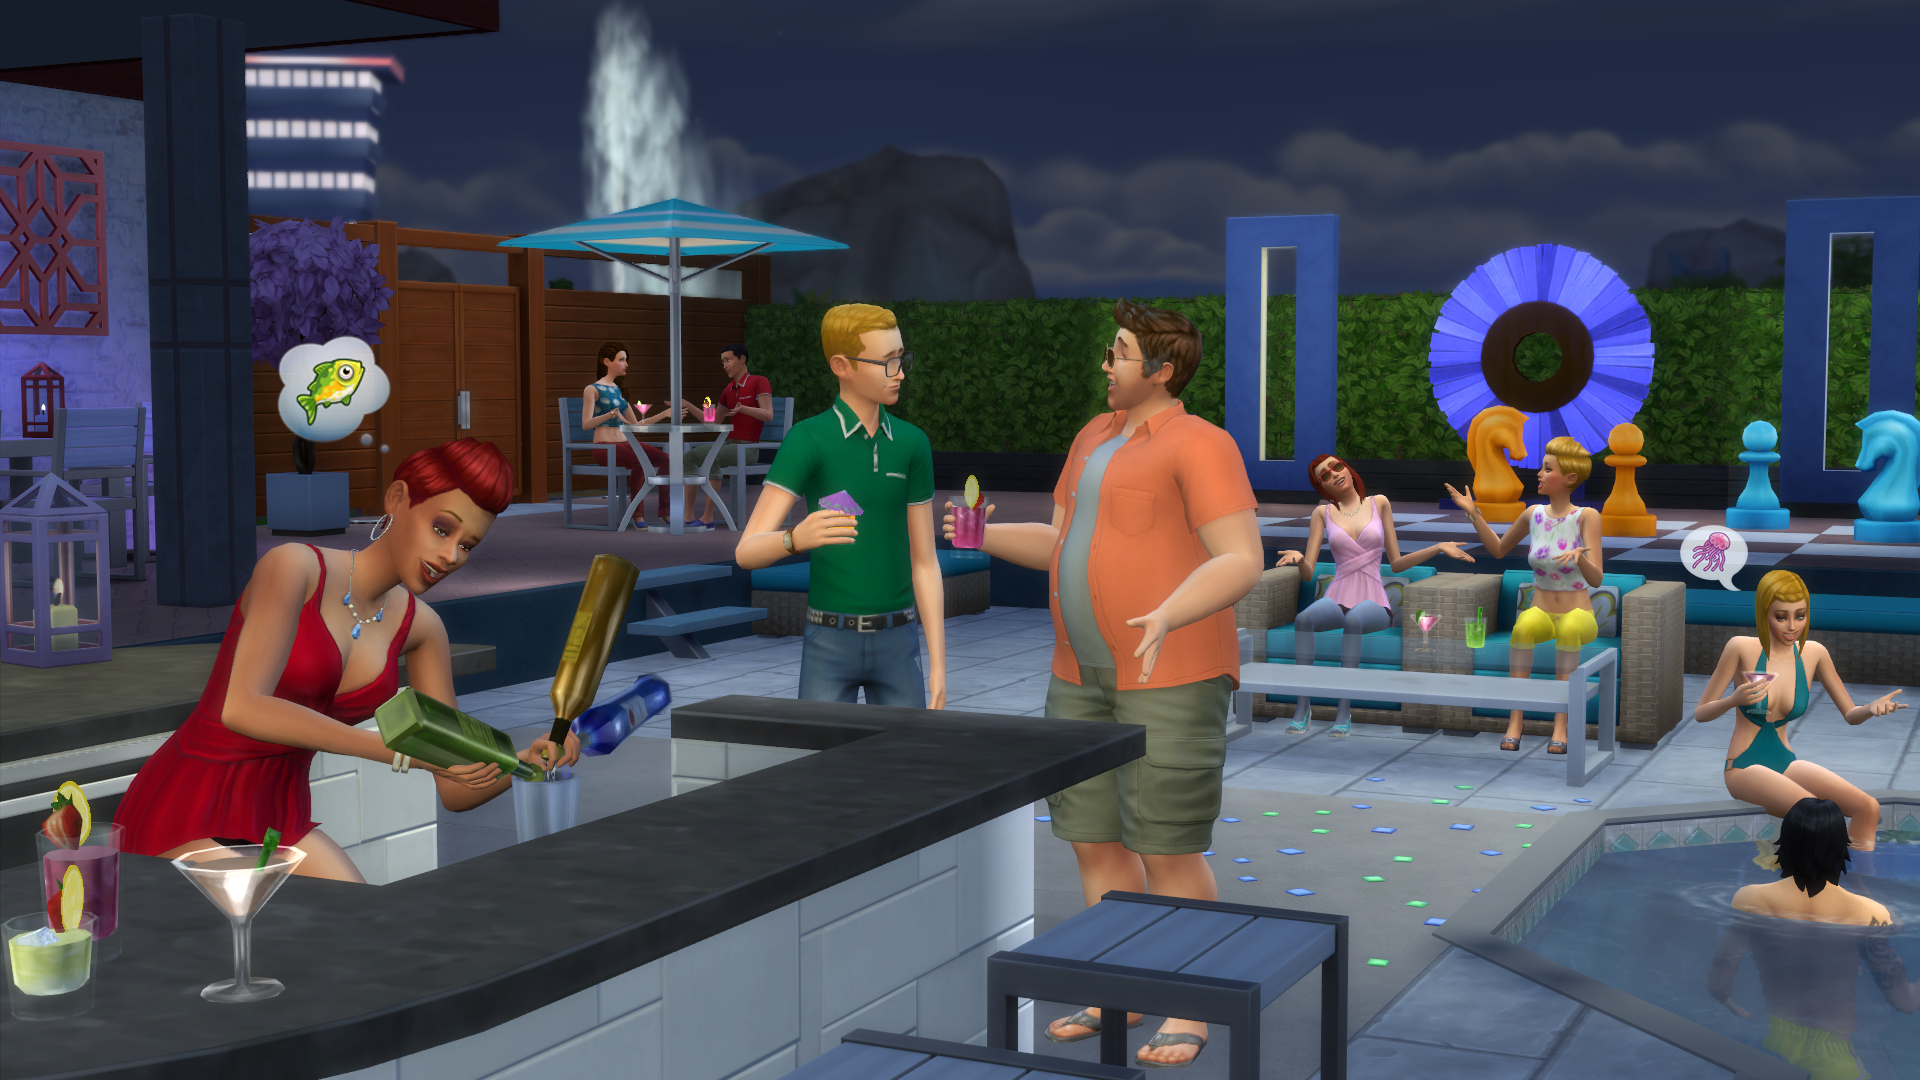 How to play The Sims 4 free on PlayStation, Xbox and PCs